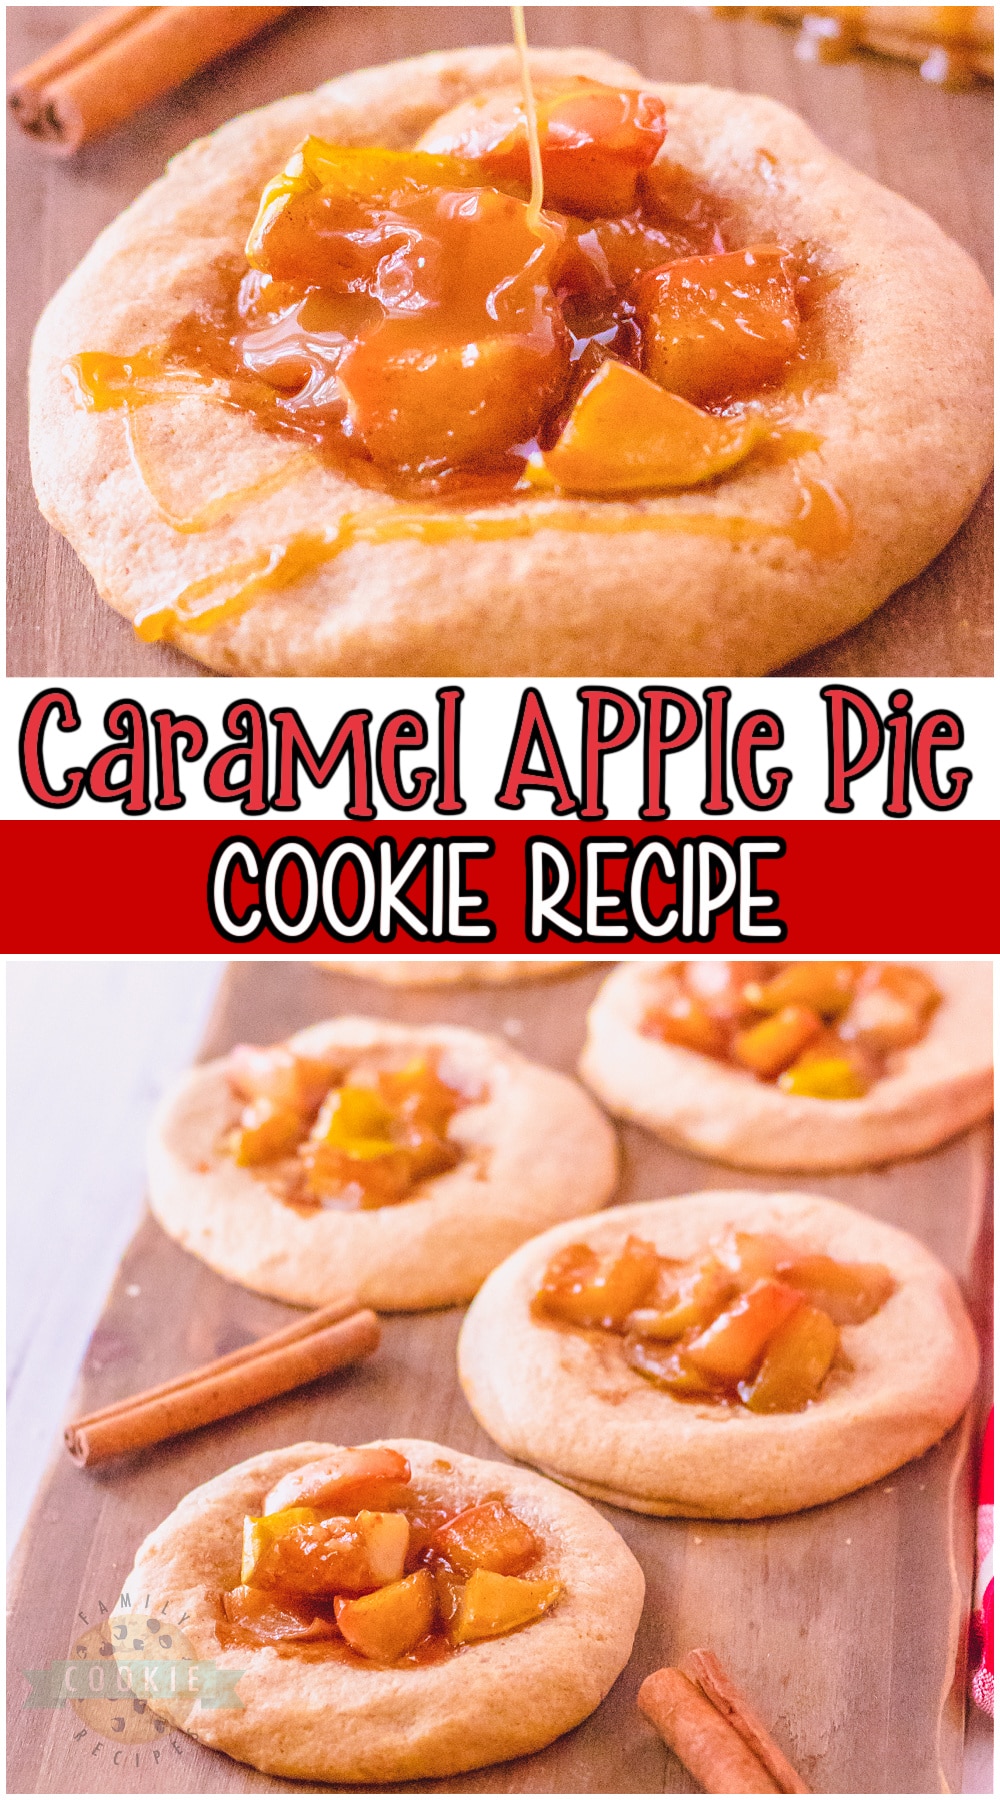 Caramel apple pie cookies are a delicious treat made with a sugar cookie crust and then filled with a fresh apple pie filling. Fabulous apple pie flavors, only in cookie form for every home baker to enjoy! #cookies #applepie #baking #dessert #cookie from FAMILY COOKIE RECIPES via @buttergirls